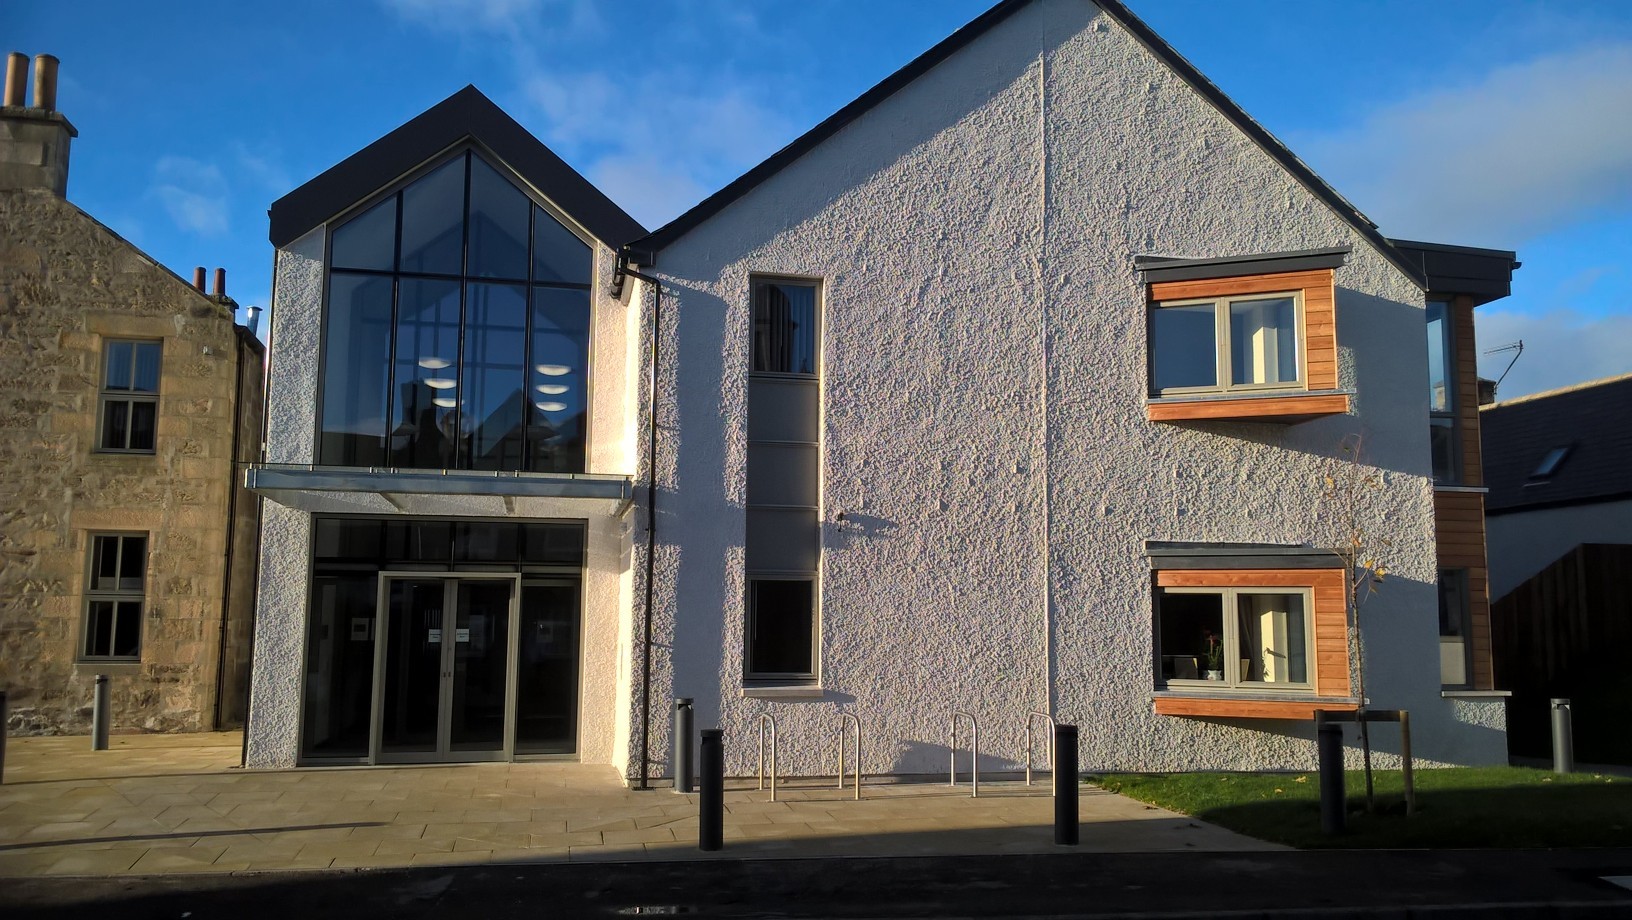 Five flats have been built in the Varis Court complex in Forres.